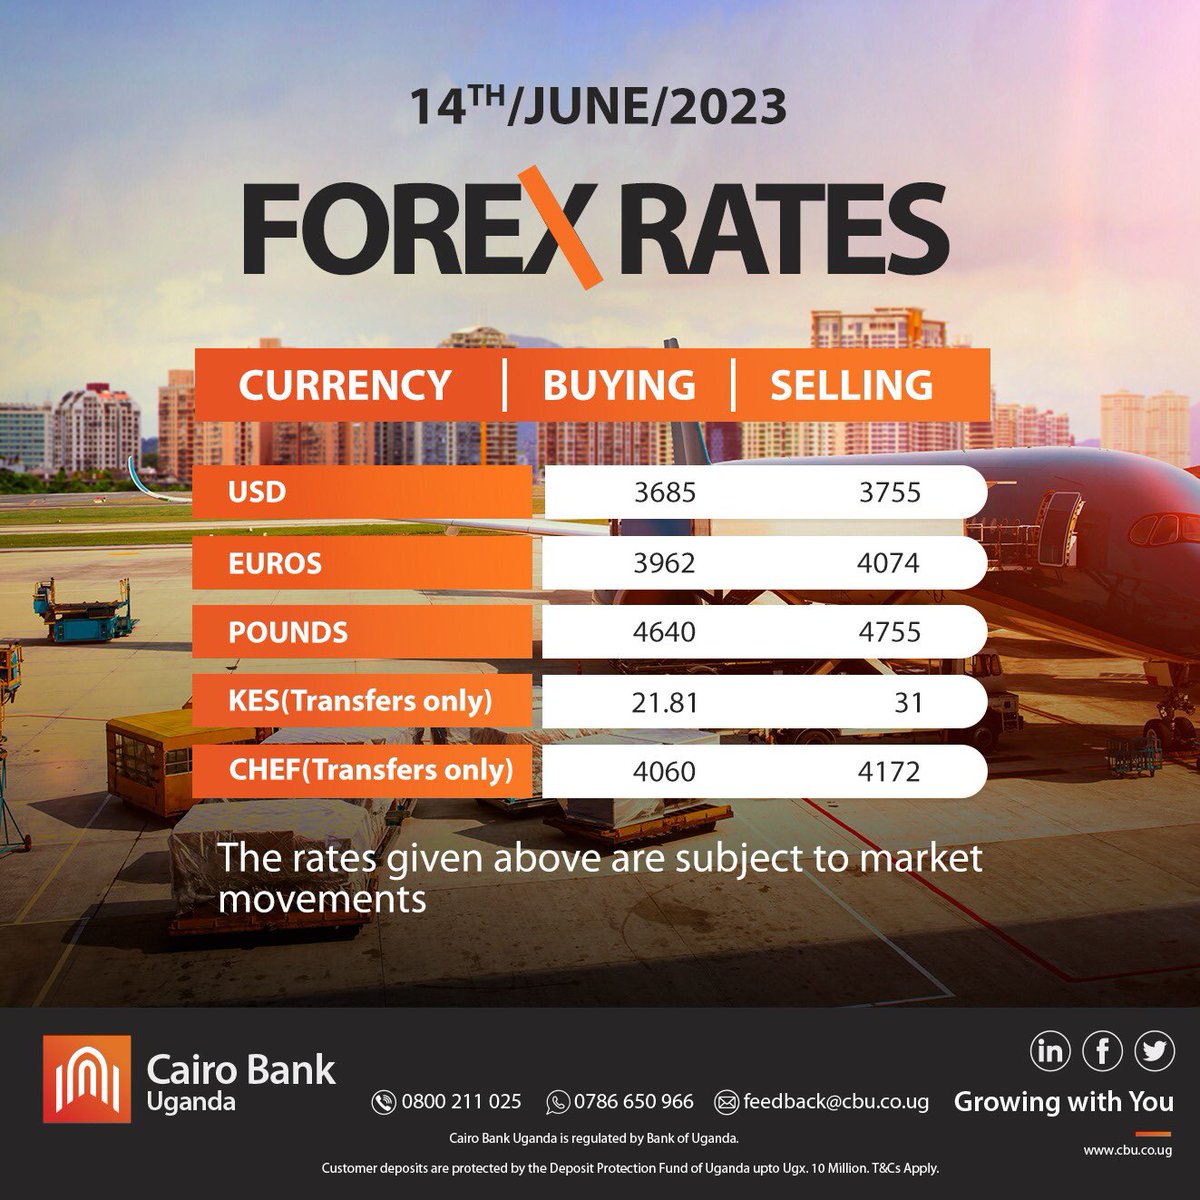 Forex Rates | 14 June, 2023

⚠️ Rates given are subject to market movements❗️

#CairoBanks #ForexRates #Money #MoneyMatters #MoneyInTheBank #Rates #Forex #ForexBanking #MoneyExchange #commerce #MoneyTalks #MoneyTips